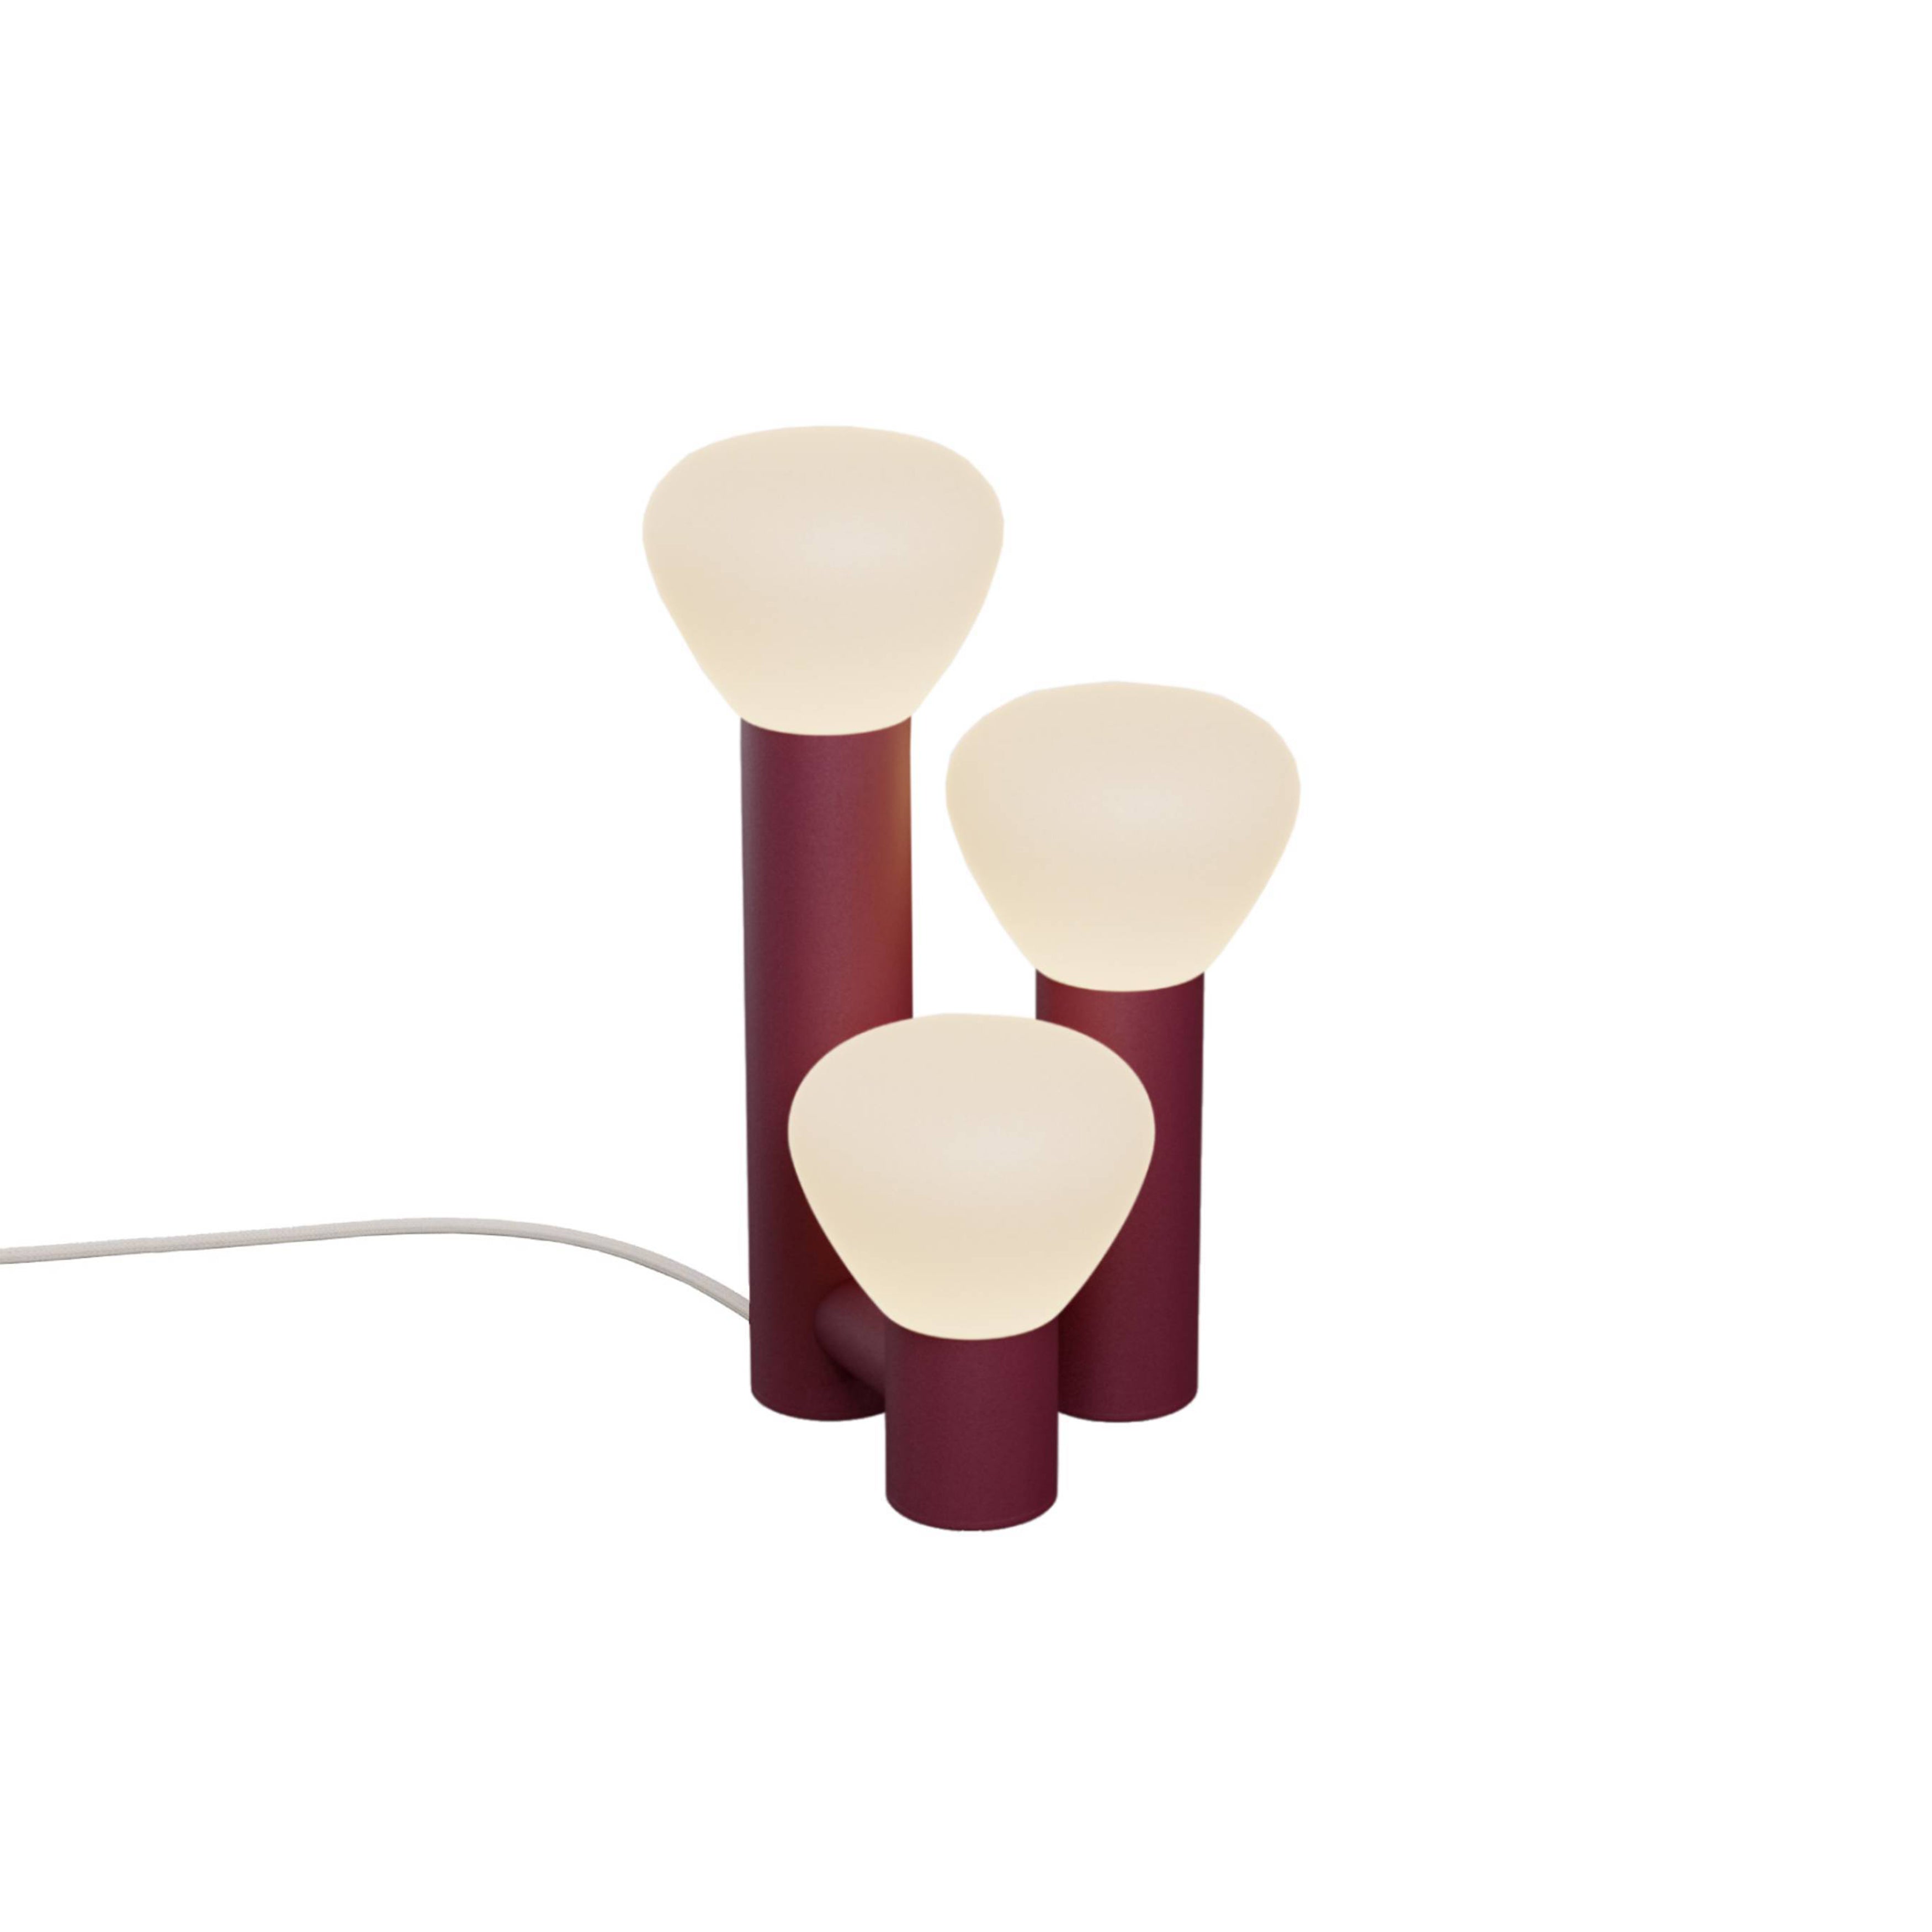 Parc 06 Table Lamp: Handswitch +  Burgundy + Beige